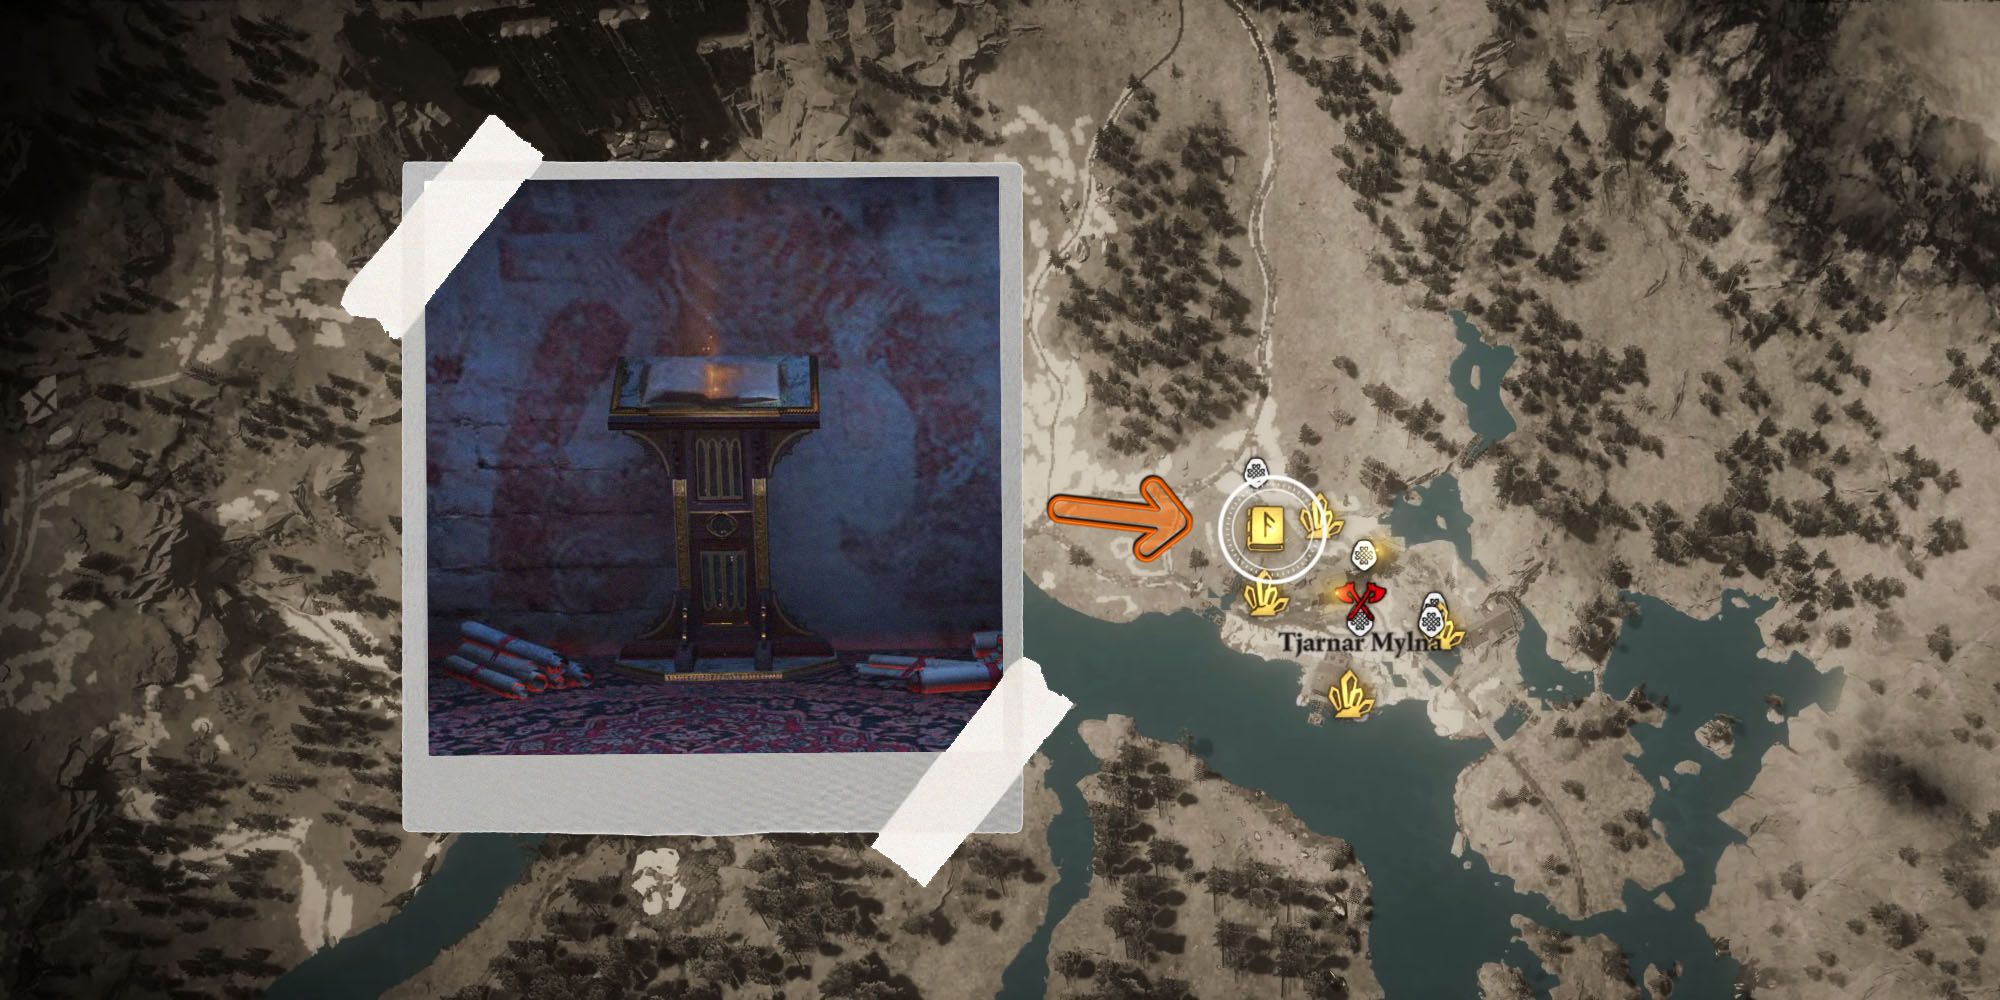 A Book of Knowledge in Assassin's Creed Valhalla, shown on the map of Svartalfheim